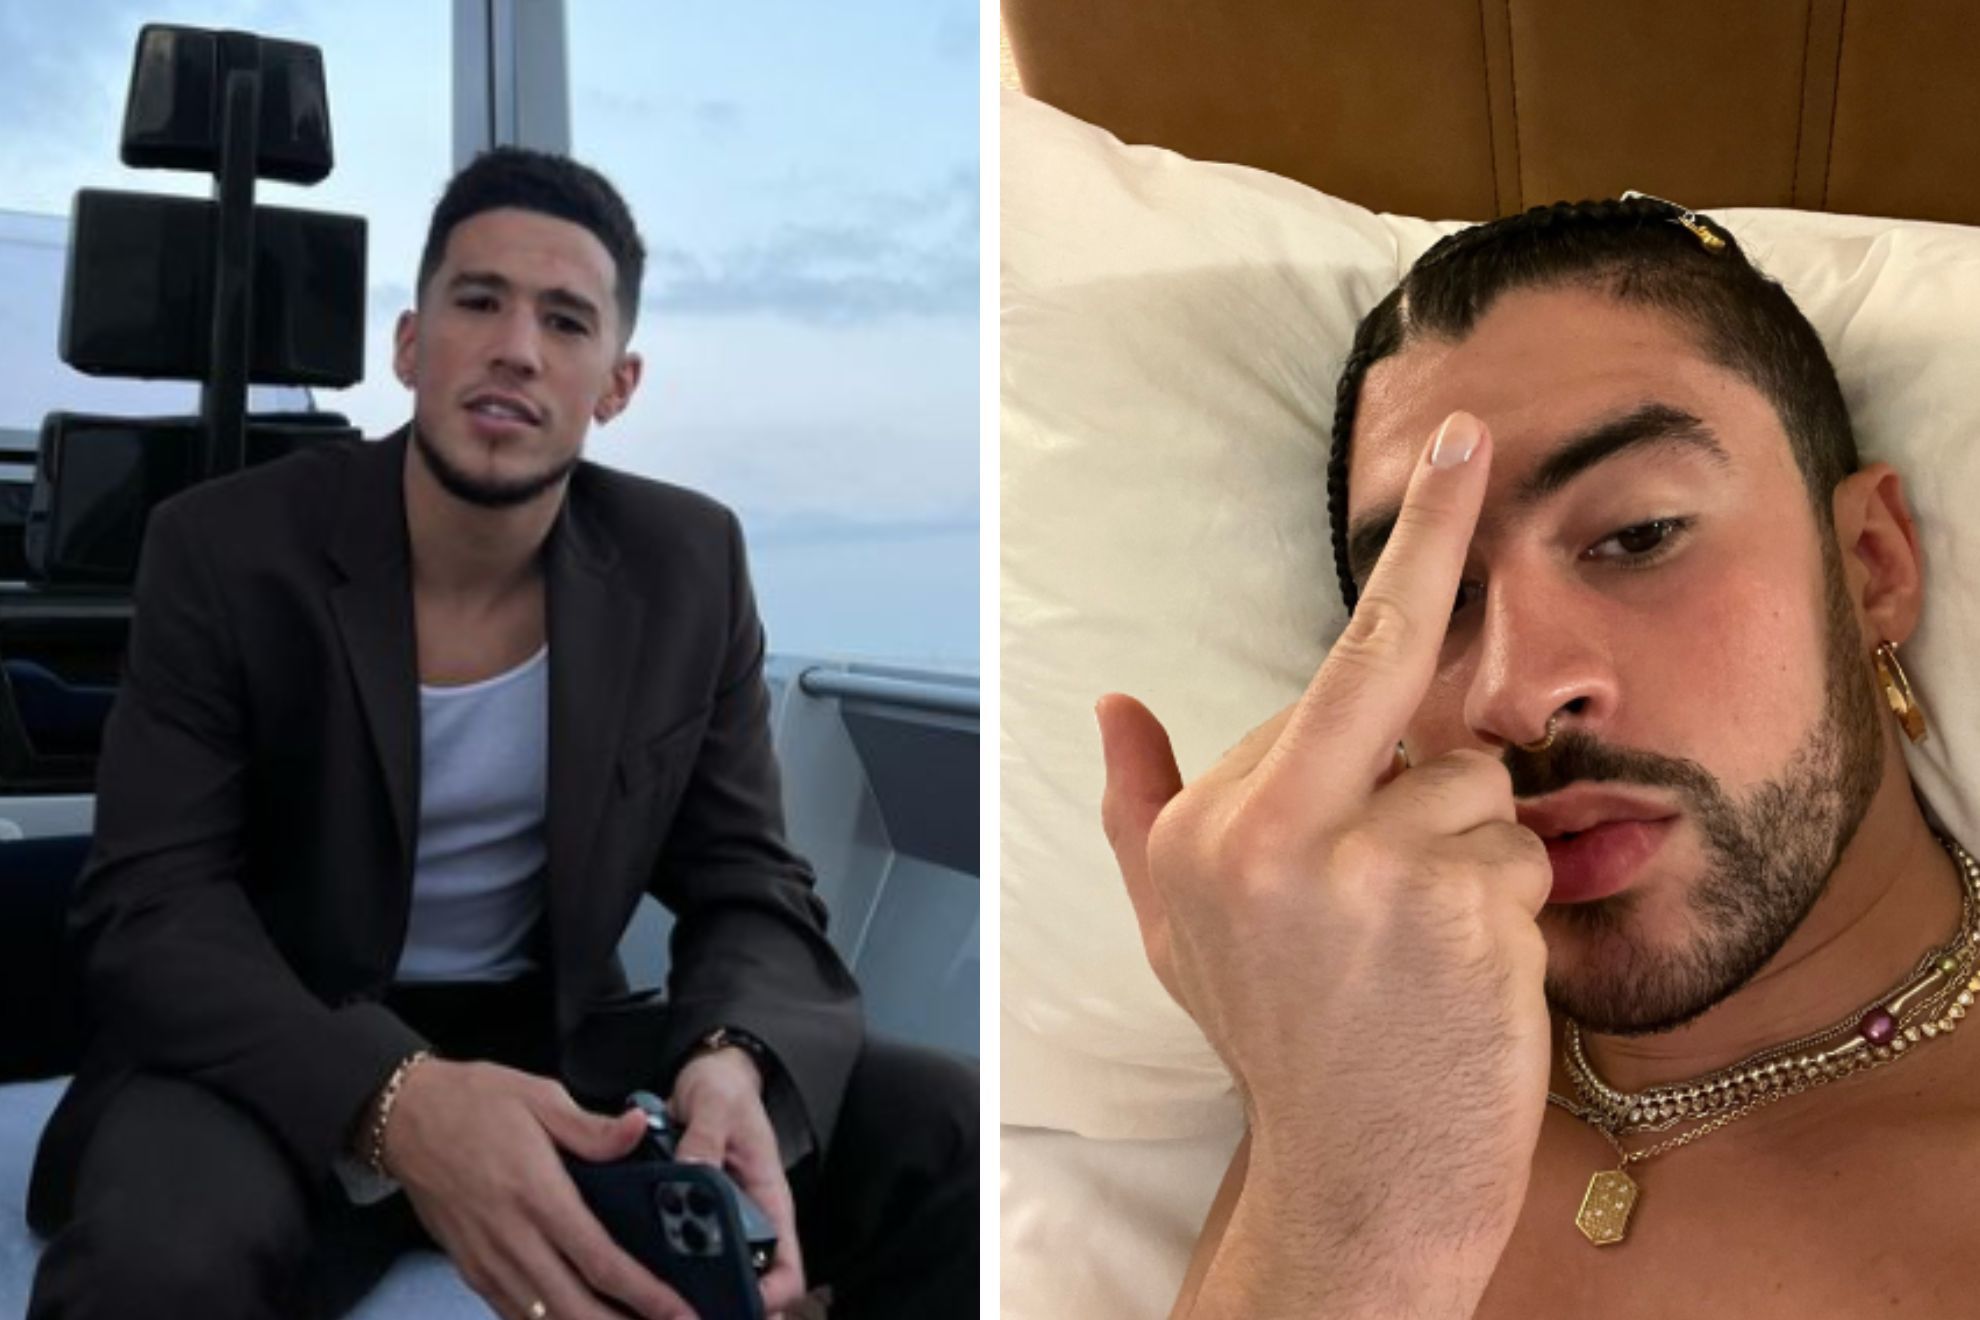 Suns guard Devin Booker and reggaeton artist Bad Bunny are beefing over Kendall Jenner